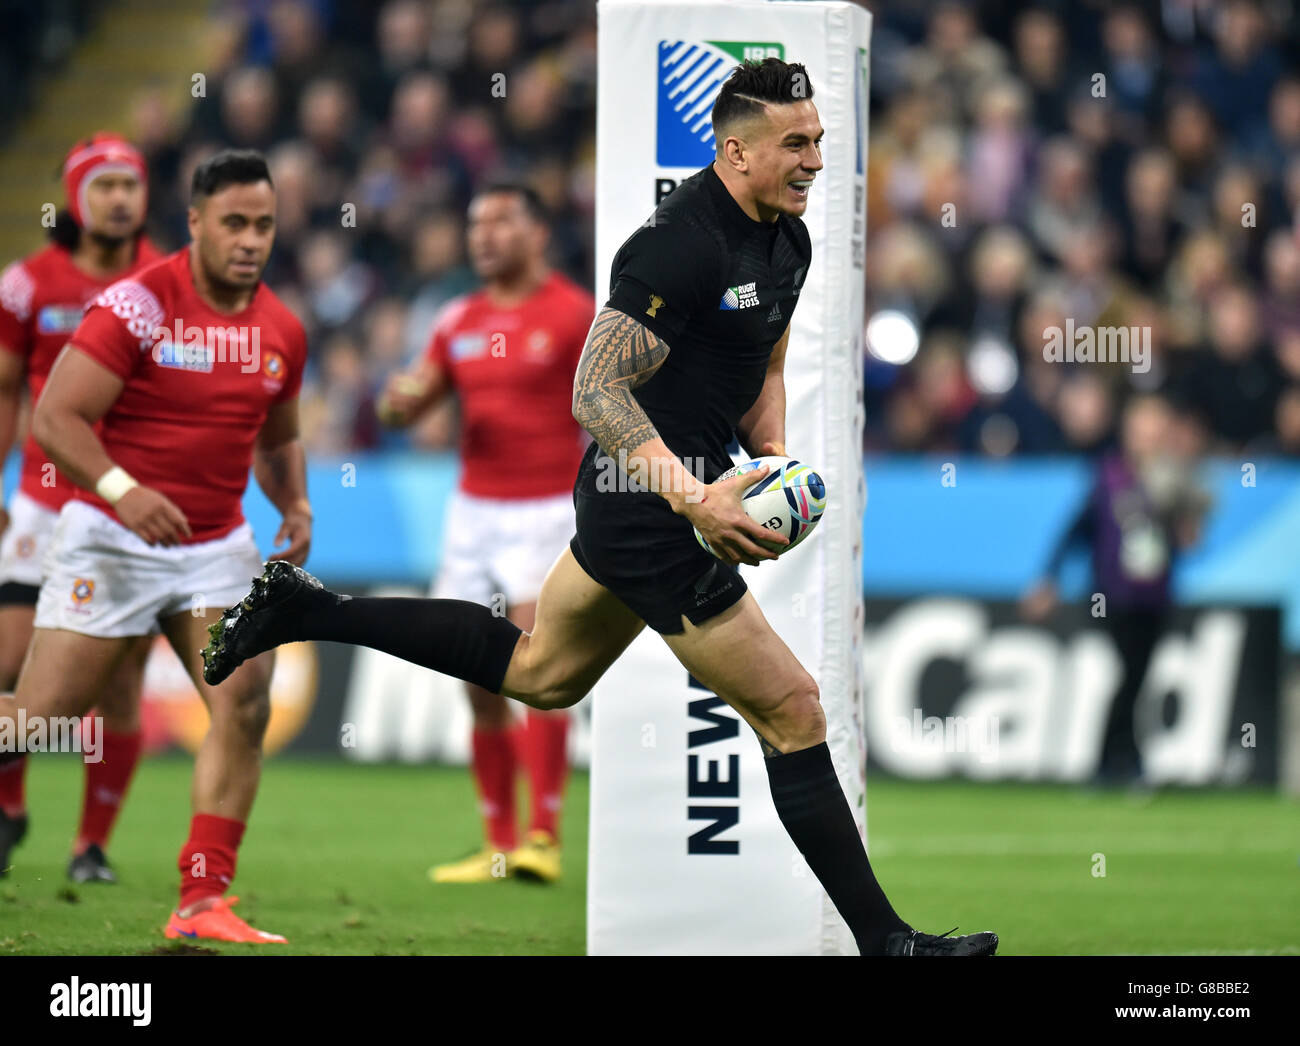 Rugby Union - Rugby World Cup 2015 - Pool C - New Zealand v Tonga - St James' Park. New Zealand's Sonny Bill Williams scores a try during the World Cup match at St James' Park, Newcastle. Stock Photo